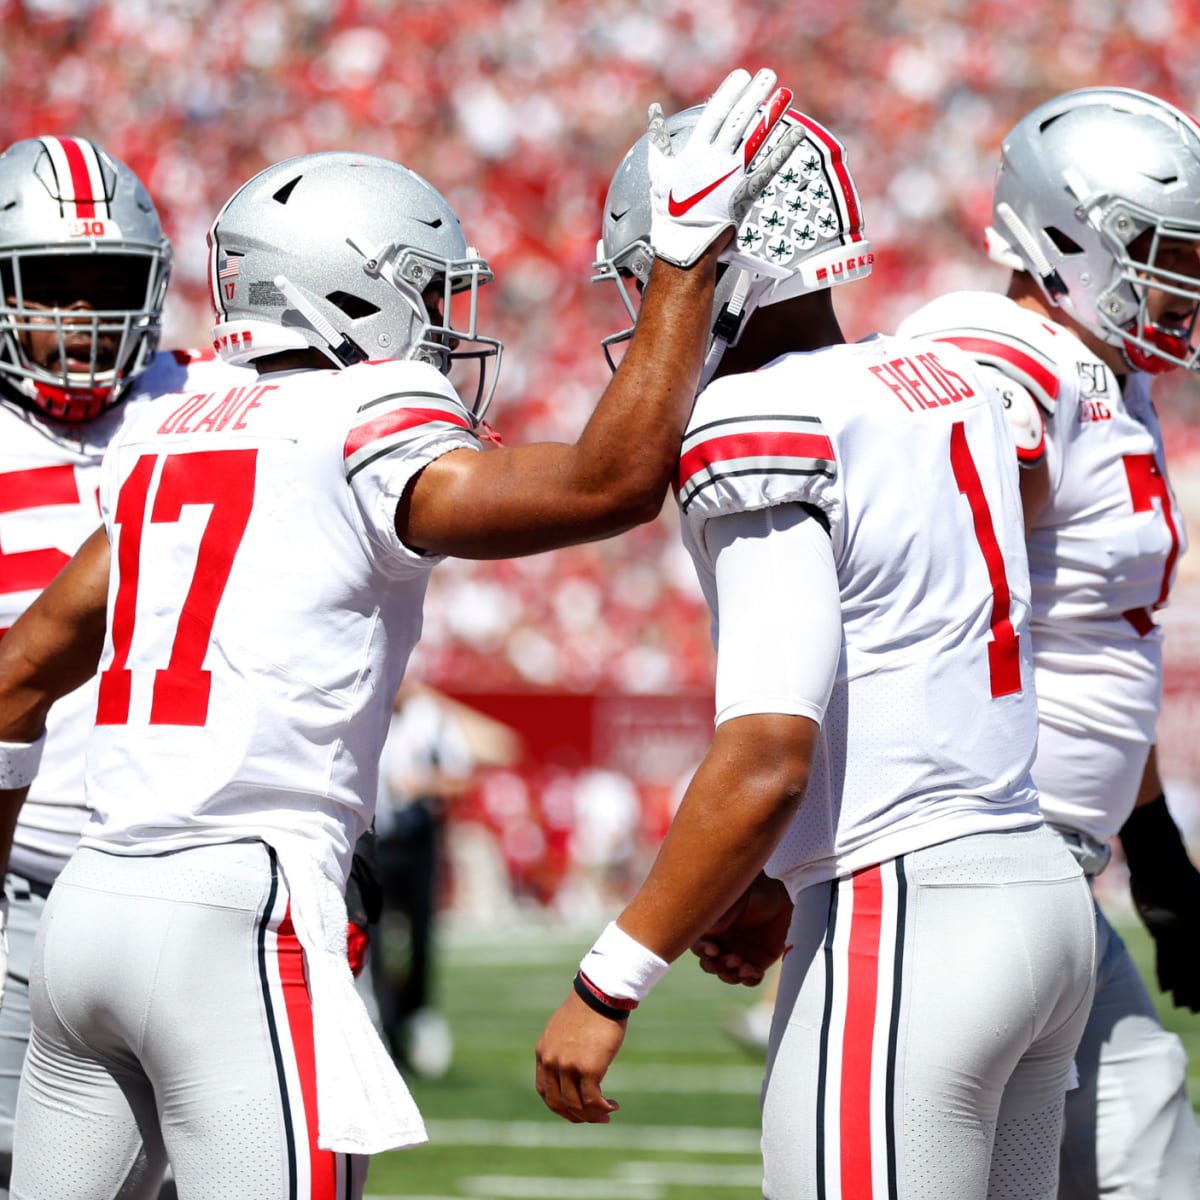 Ohio State WR Chris Olave Hints At Number Change On Twitter - The